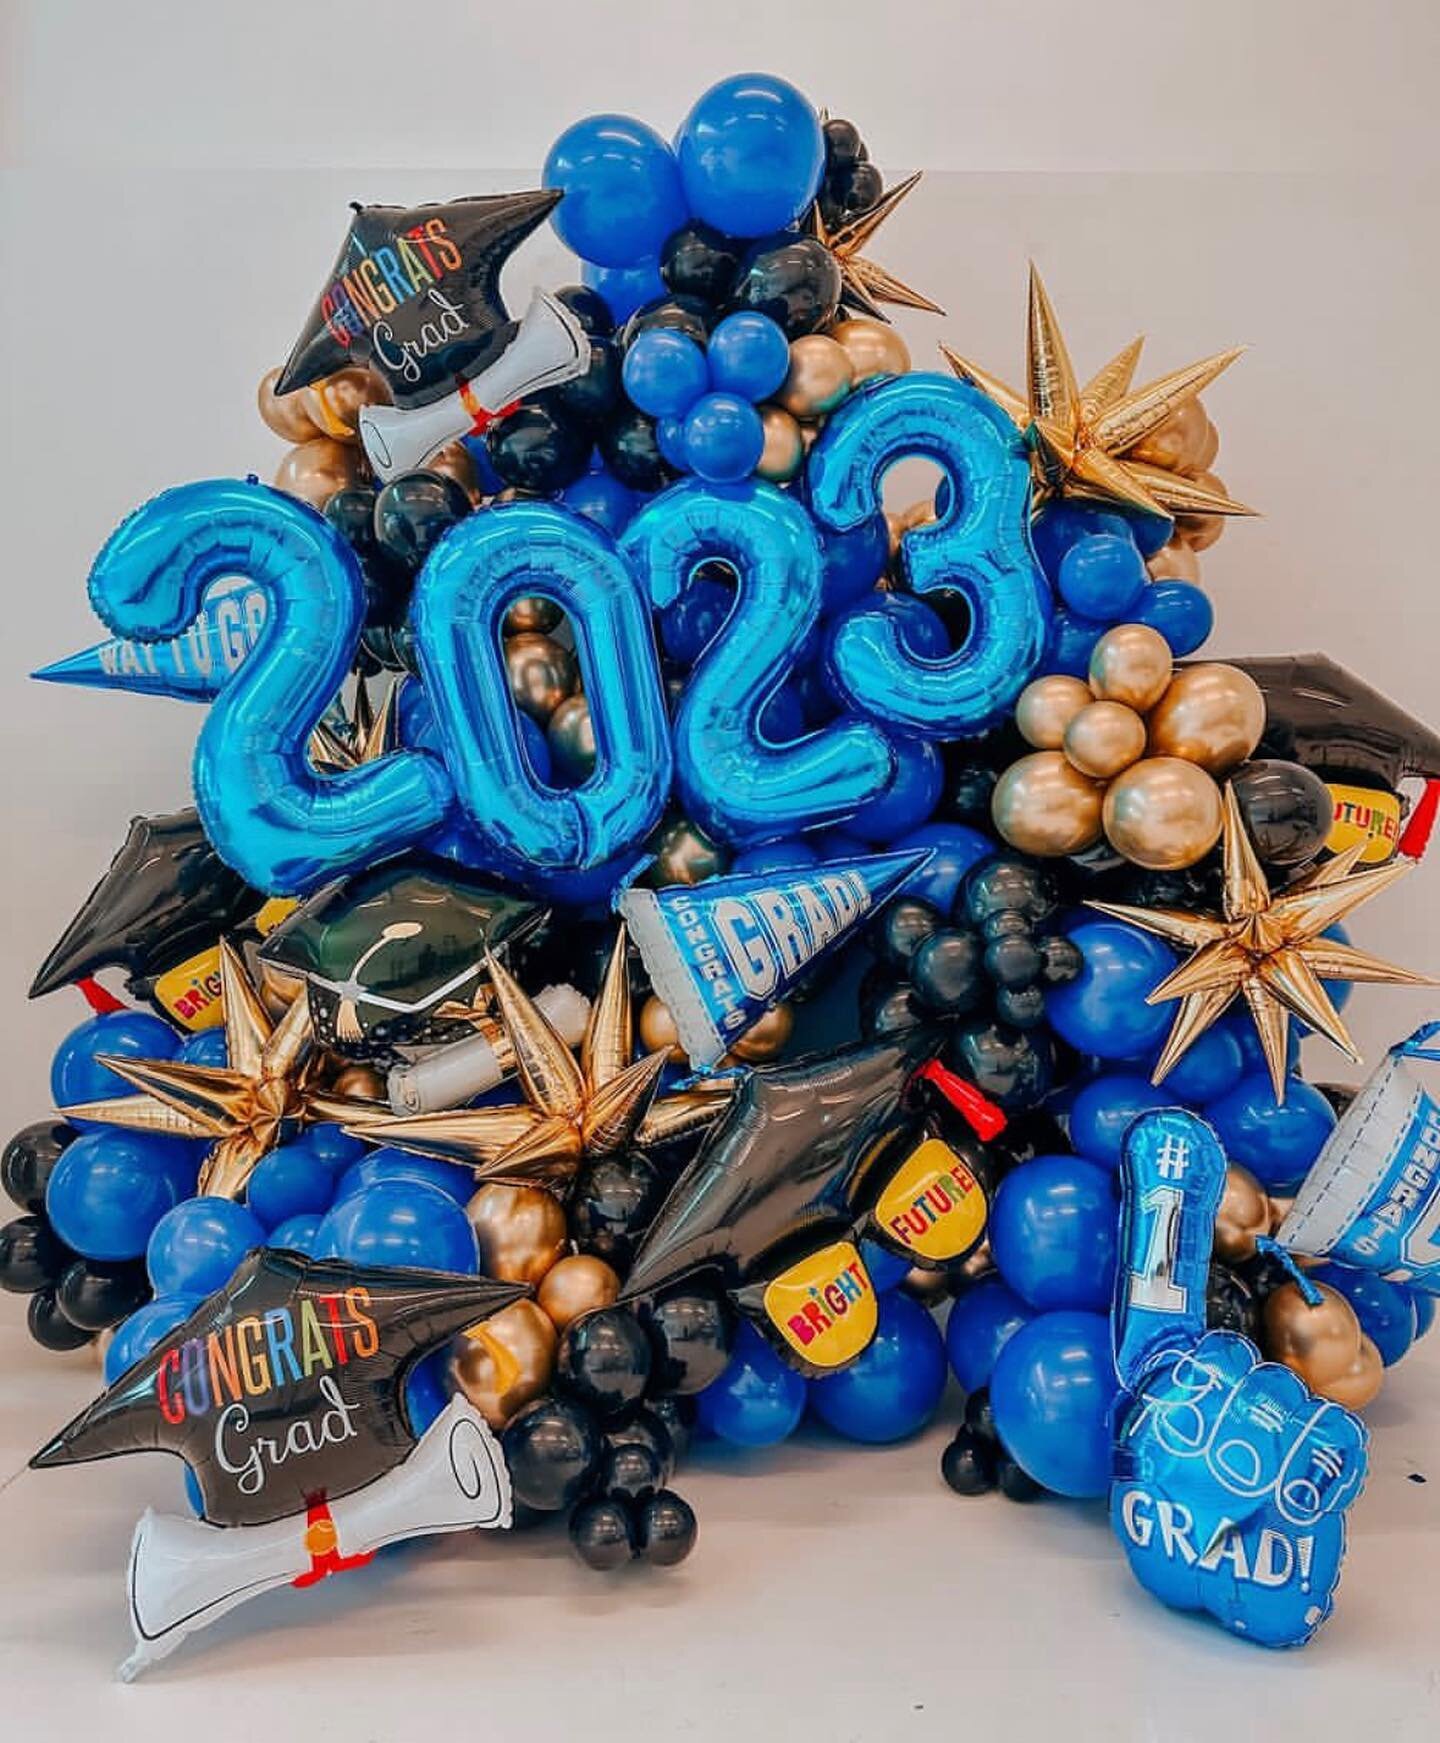 Class of 2023🎓🎉

Where are our 2023 grads at?? You deserve some Balloon Therapy to celebrate this huge life milestone! Book now and we will make your grad party one to remember! 🎈 
&bull;
&bull;
&bull;
#balloontherapyokc #balloons #therapy #gradpa